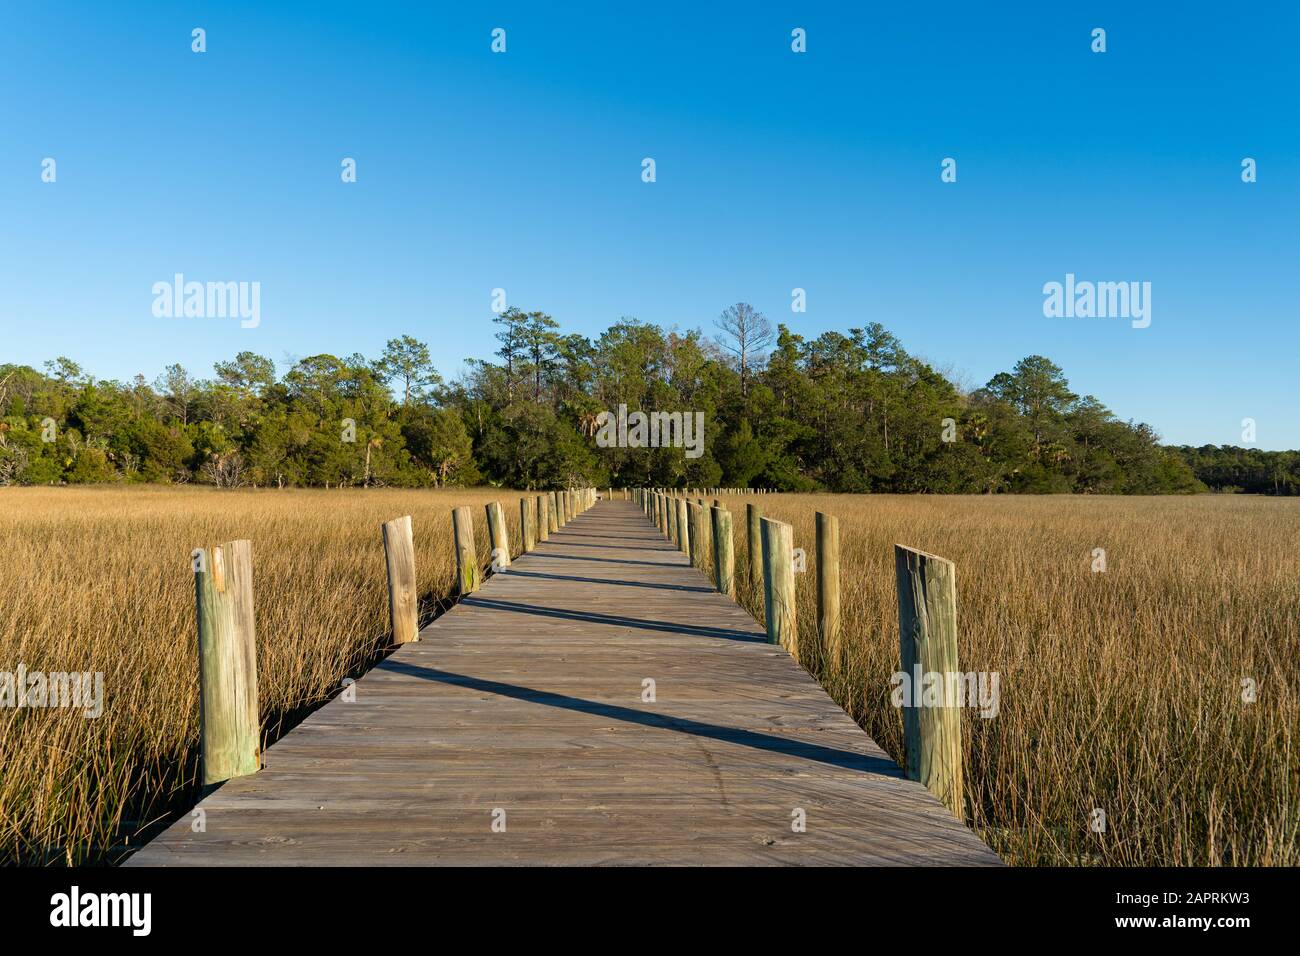 A raised wooden walking path cuts through marsh grass on a clear day Stock Photo